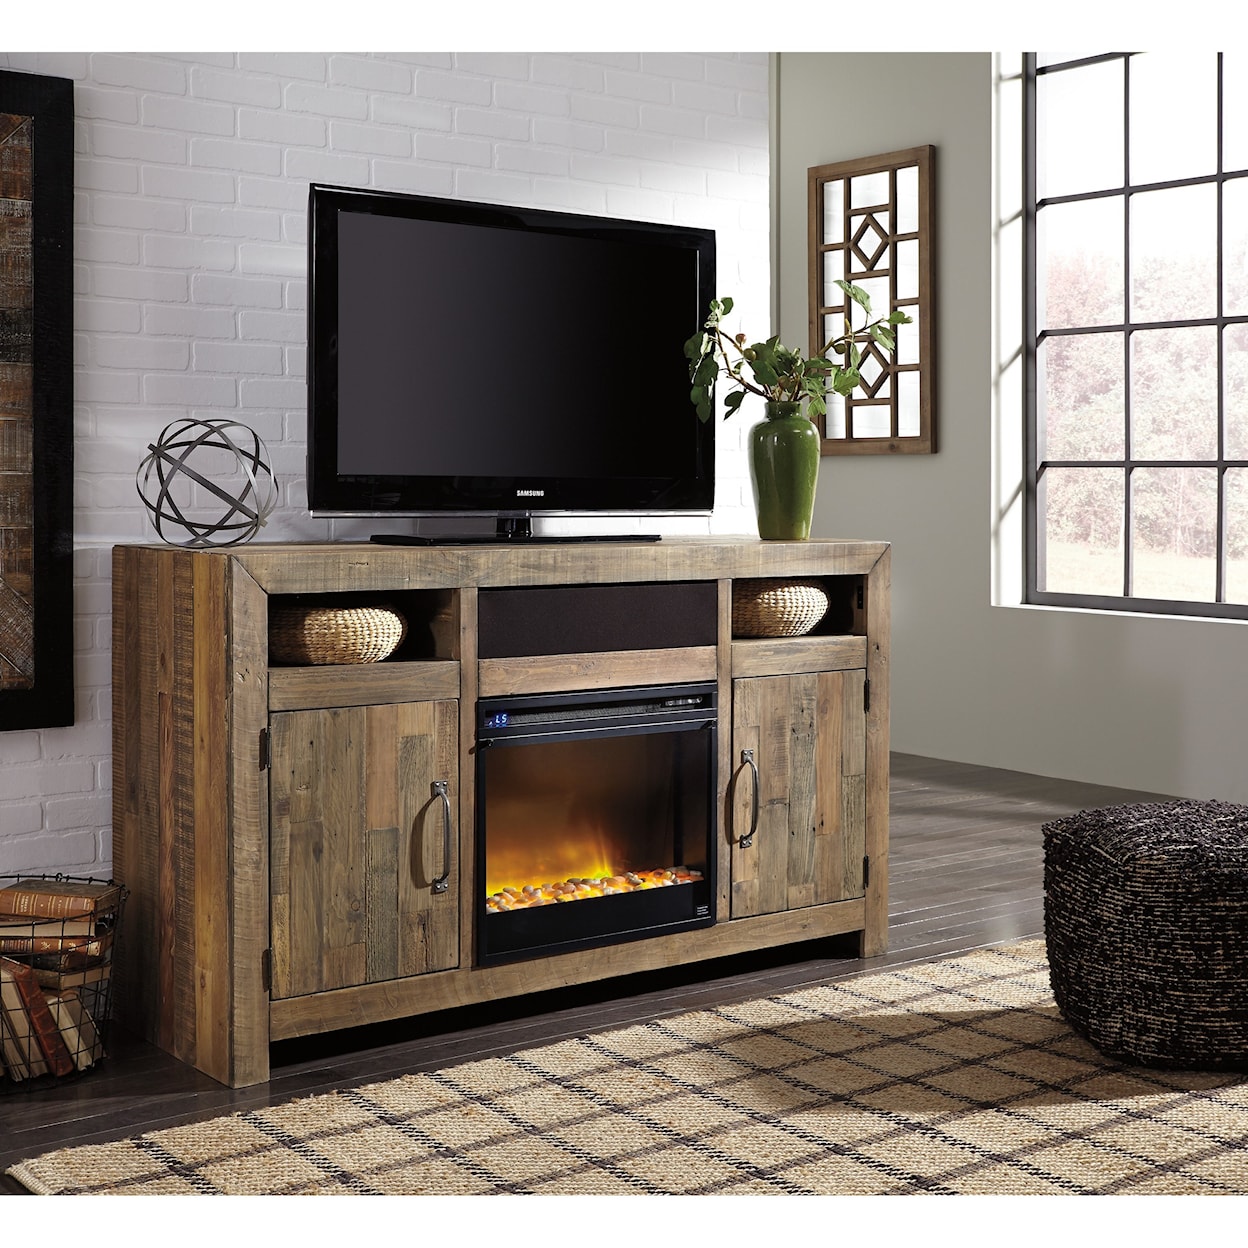 Benchcraft Sommerford Large TV Stand